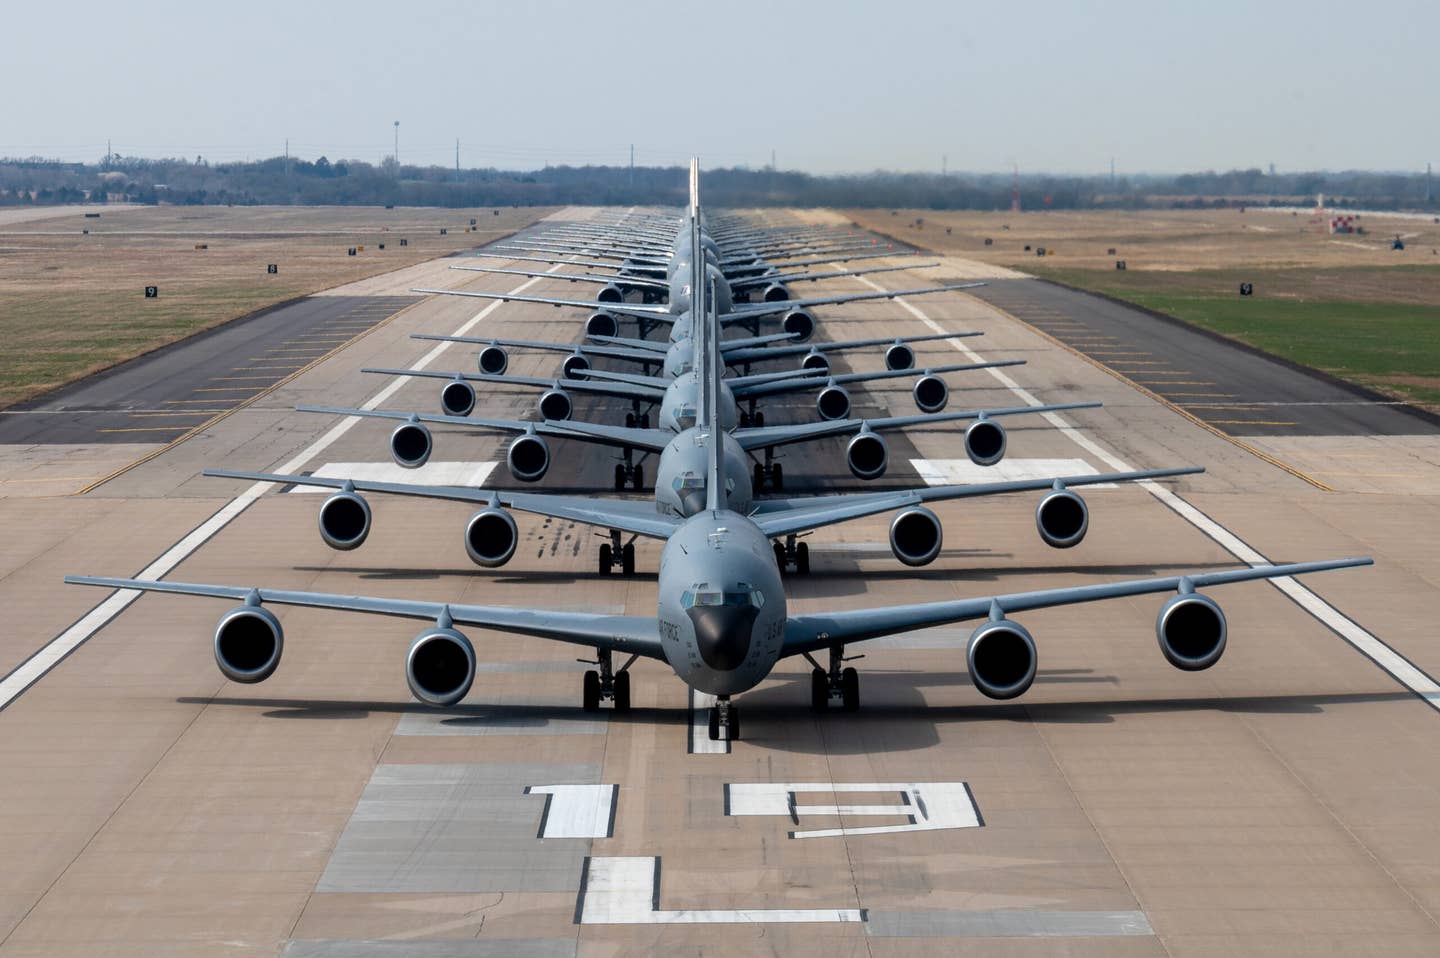 16 KC-46s and five KC-135s line up for the elephant walk during Exercise Lethal Pride on March 27, at McConnell Air Force Base, Kansas. <em>U.S. Air Force photo by Airman 1st Class Brenden Beezley</em><br>